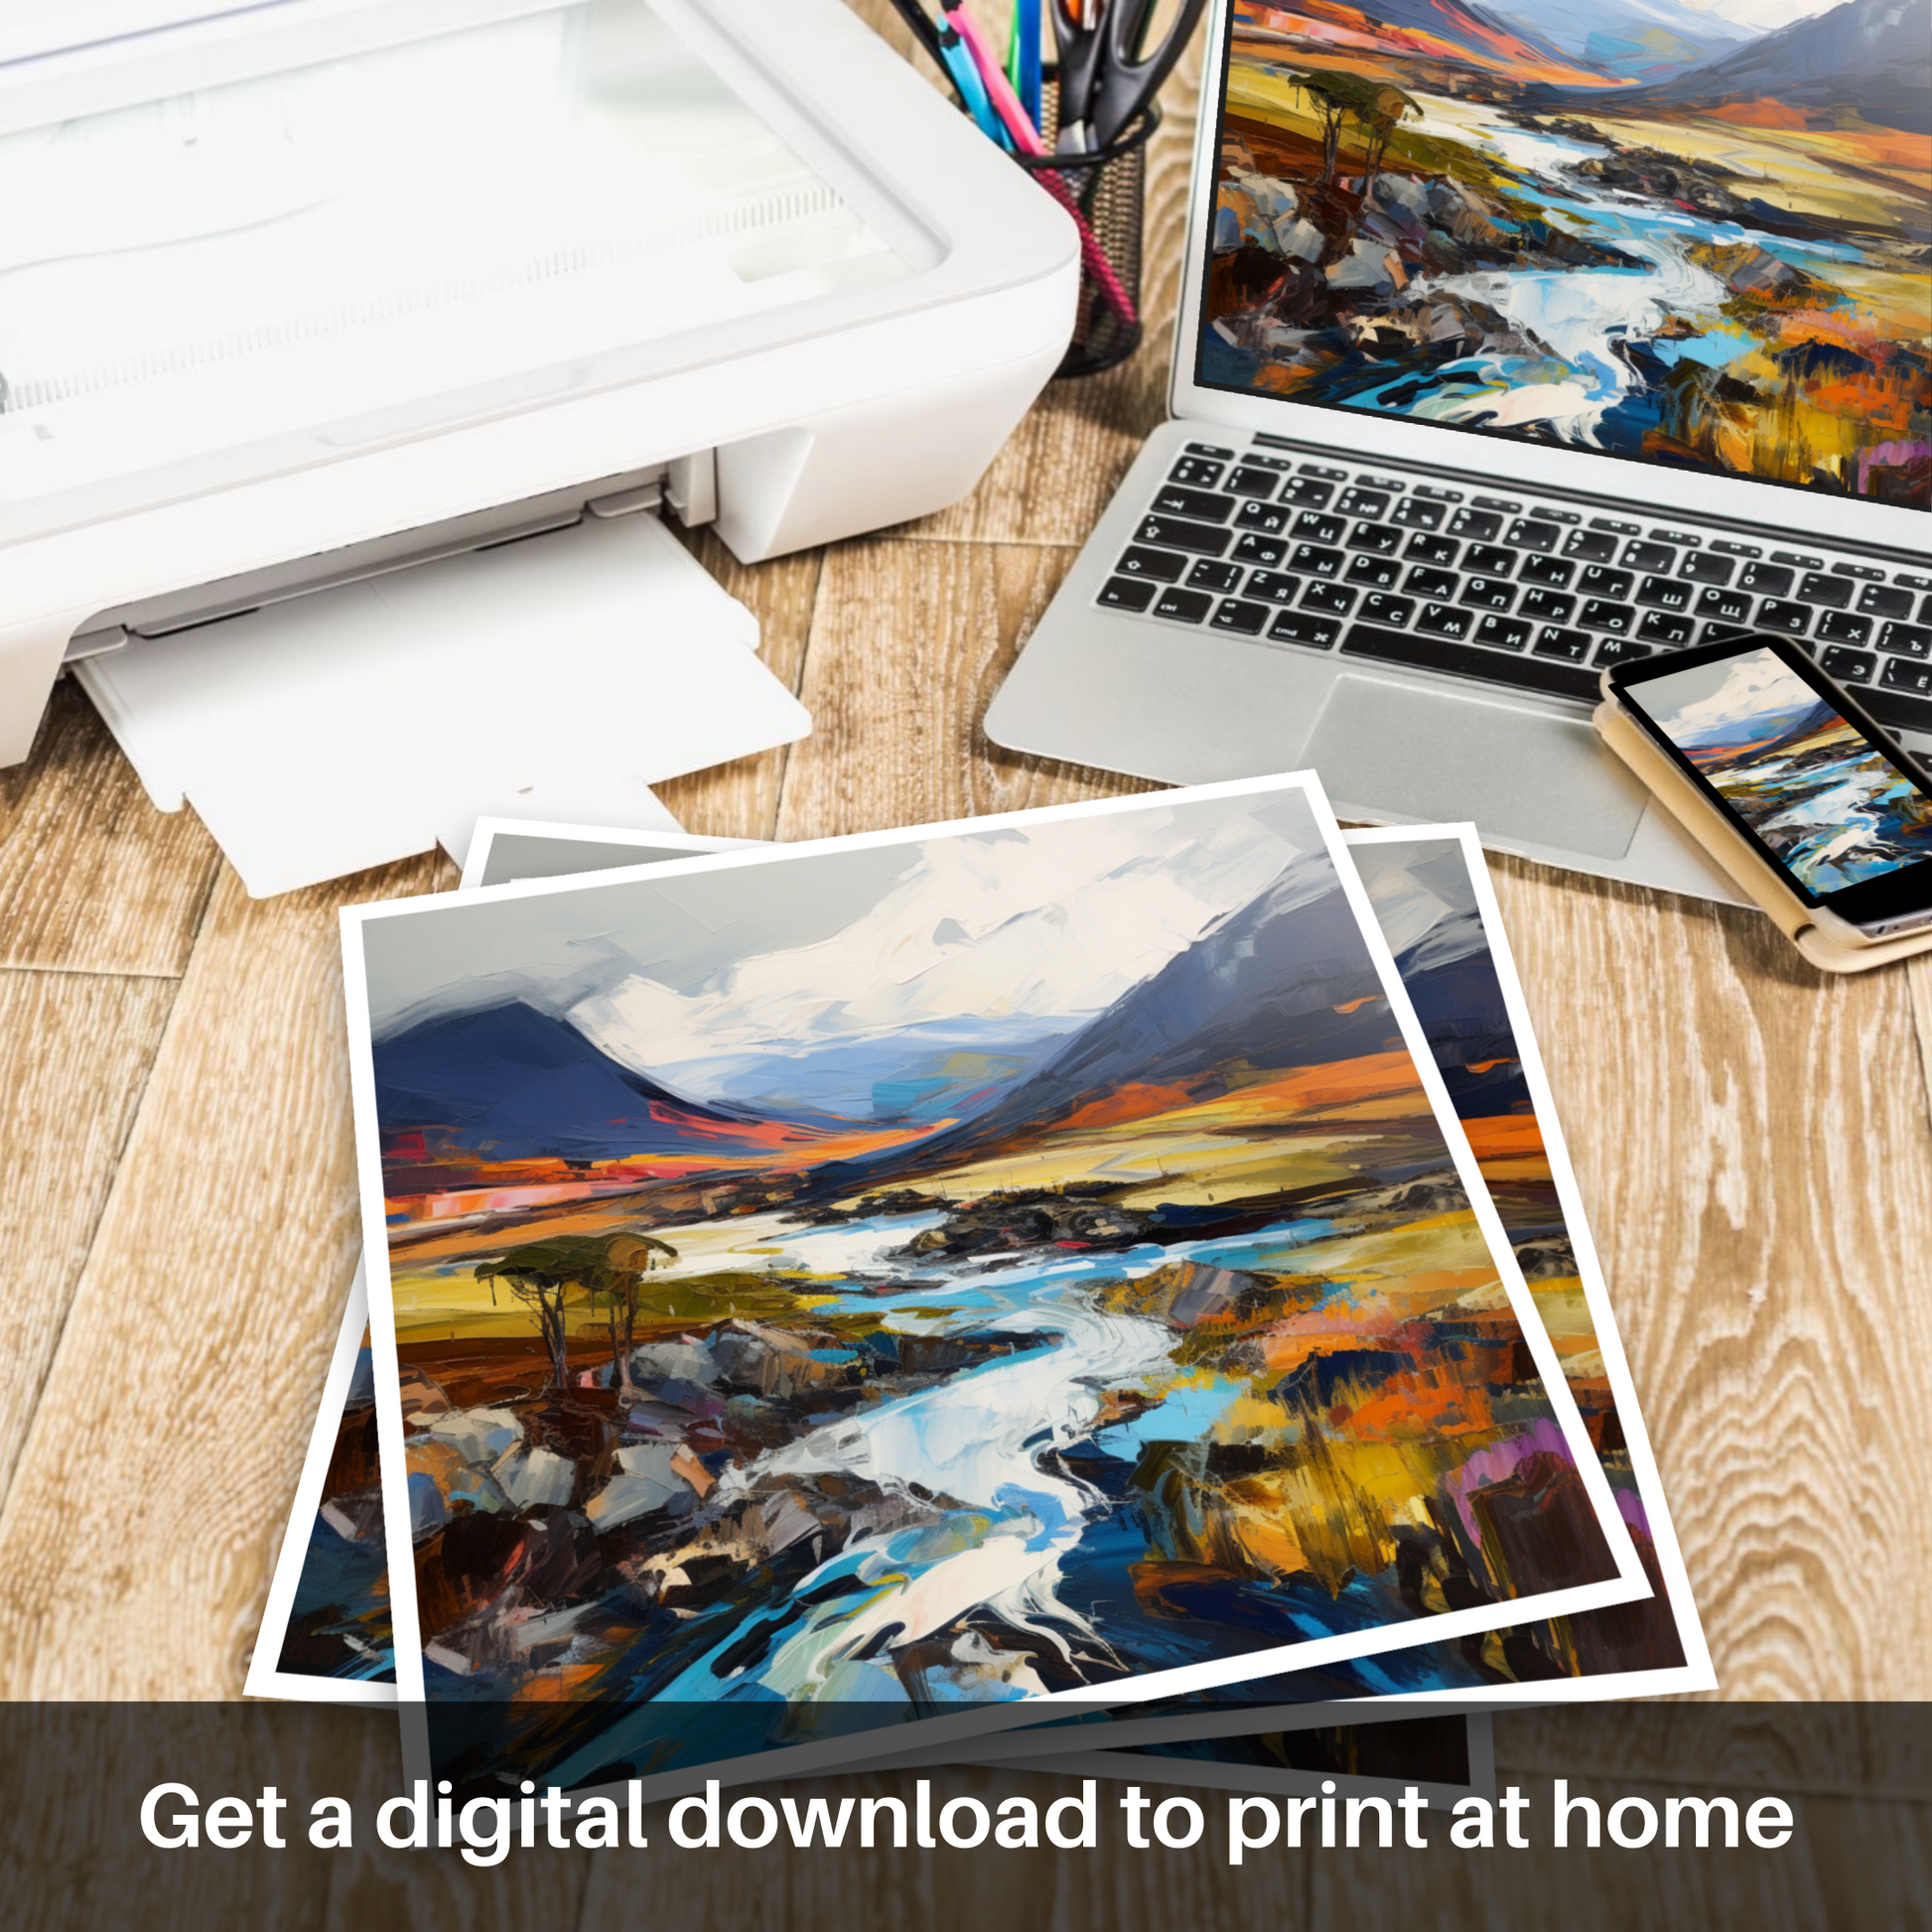 Downloadable and printable picture of Geal-chàrn (Drumochter)